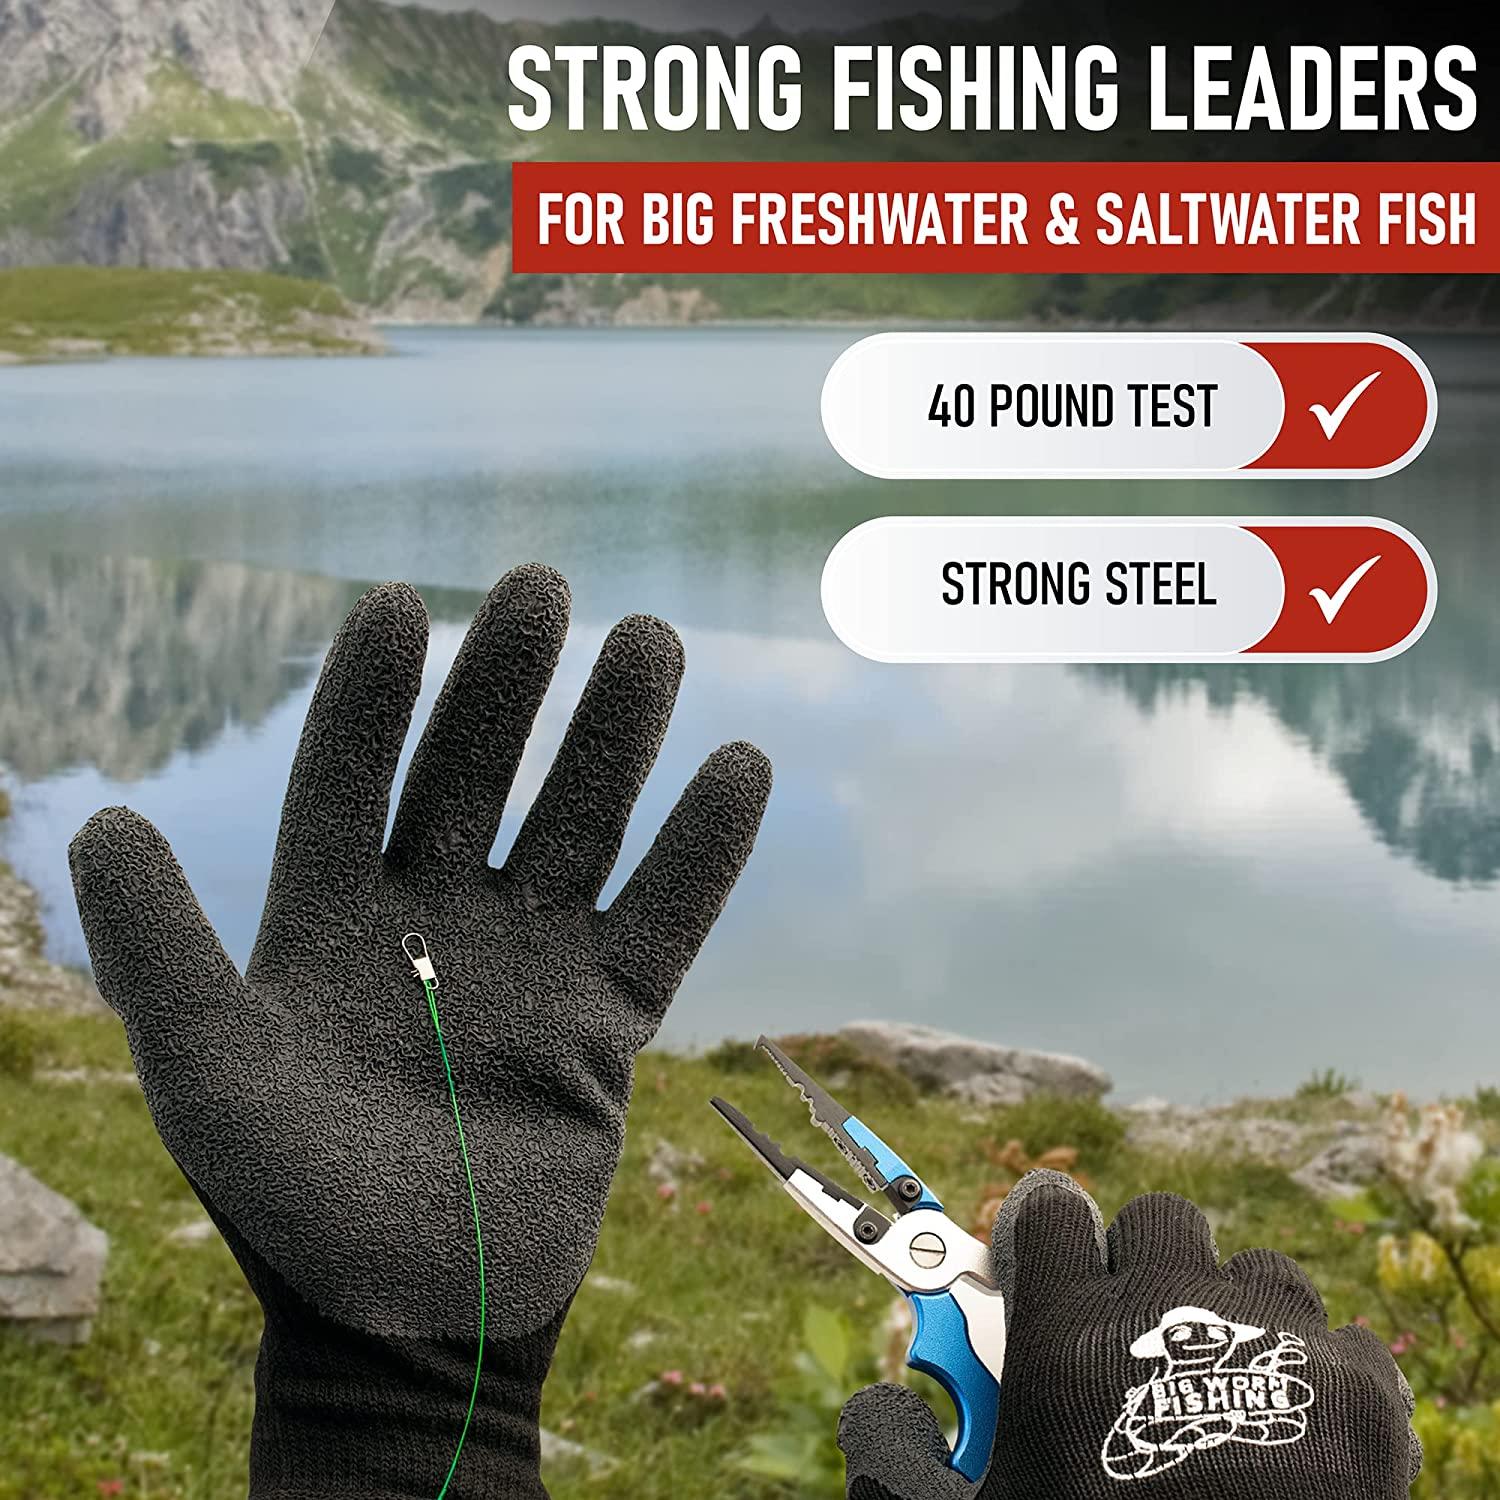 Leader Line, Discount Fishing Supplies